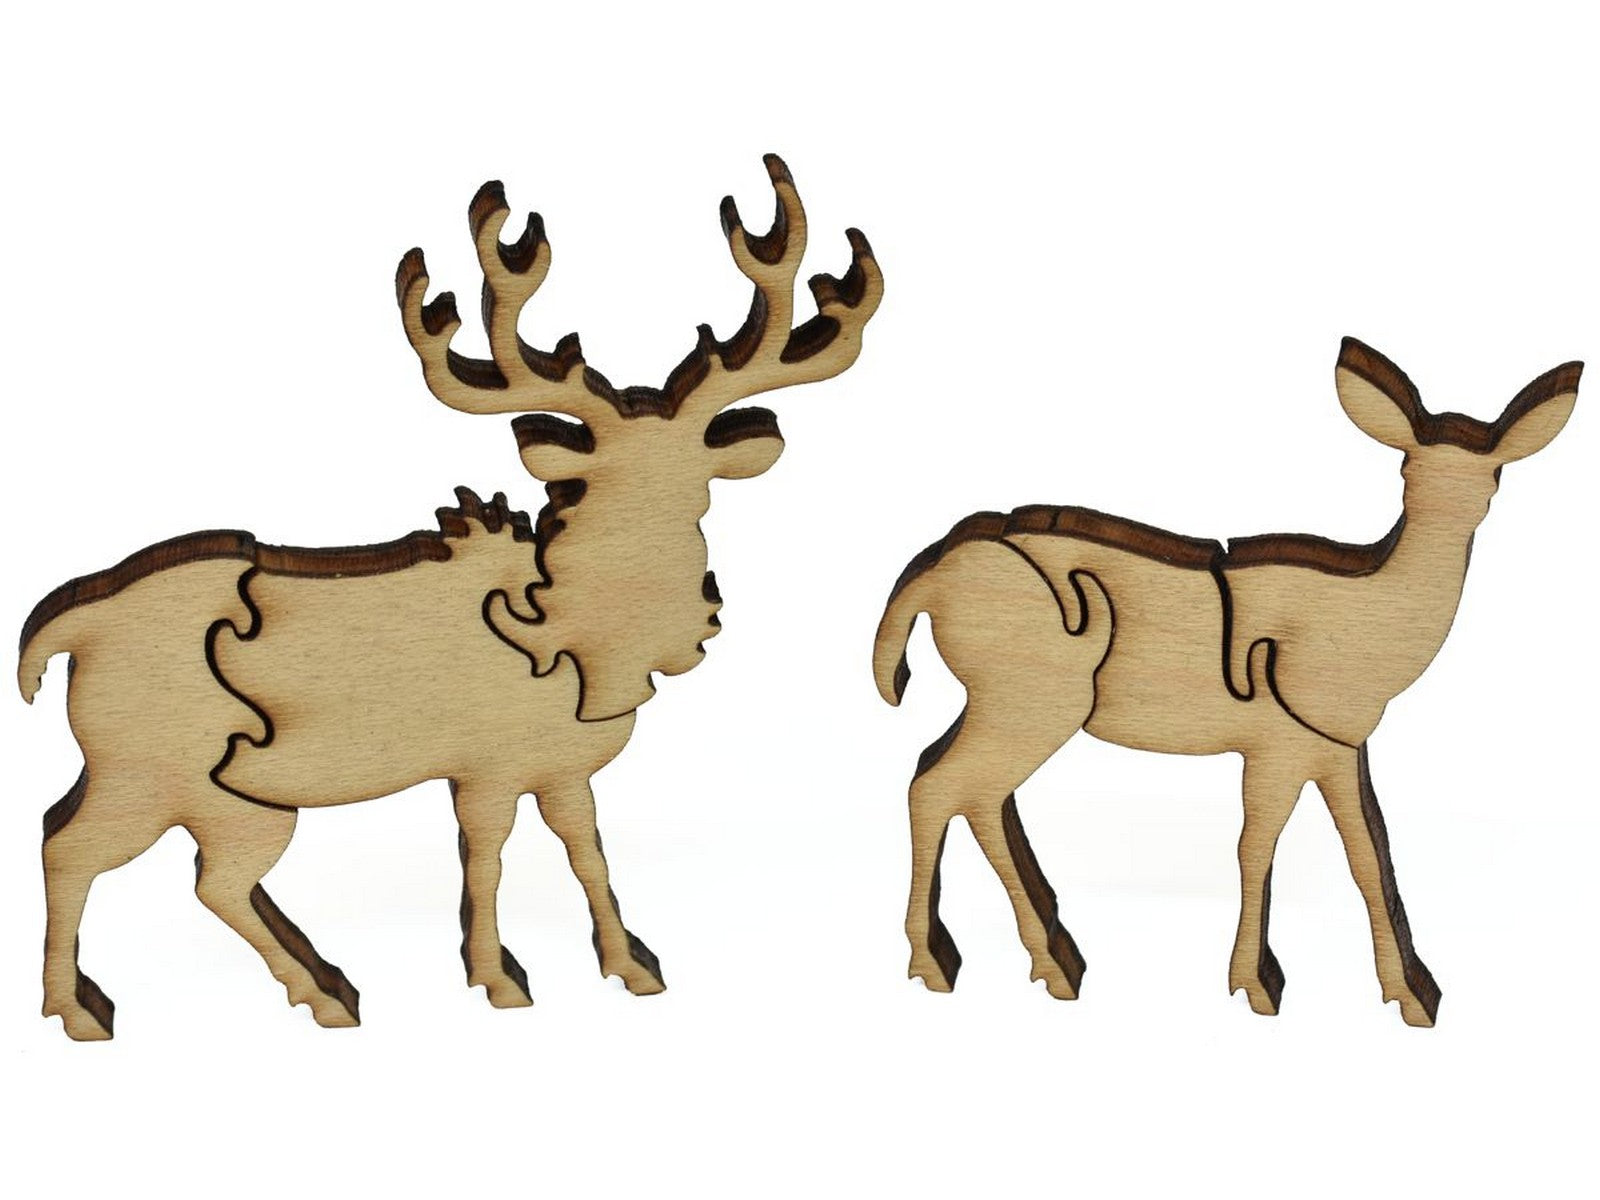 A closeup of pieces showing a doe and buck.